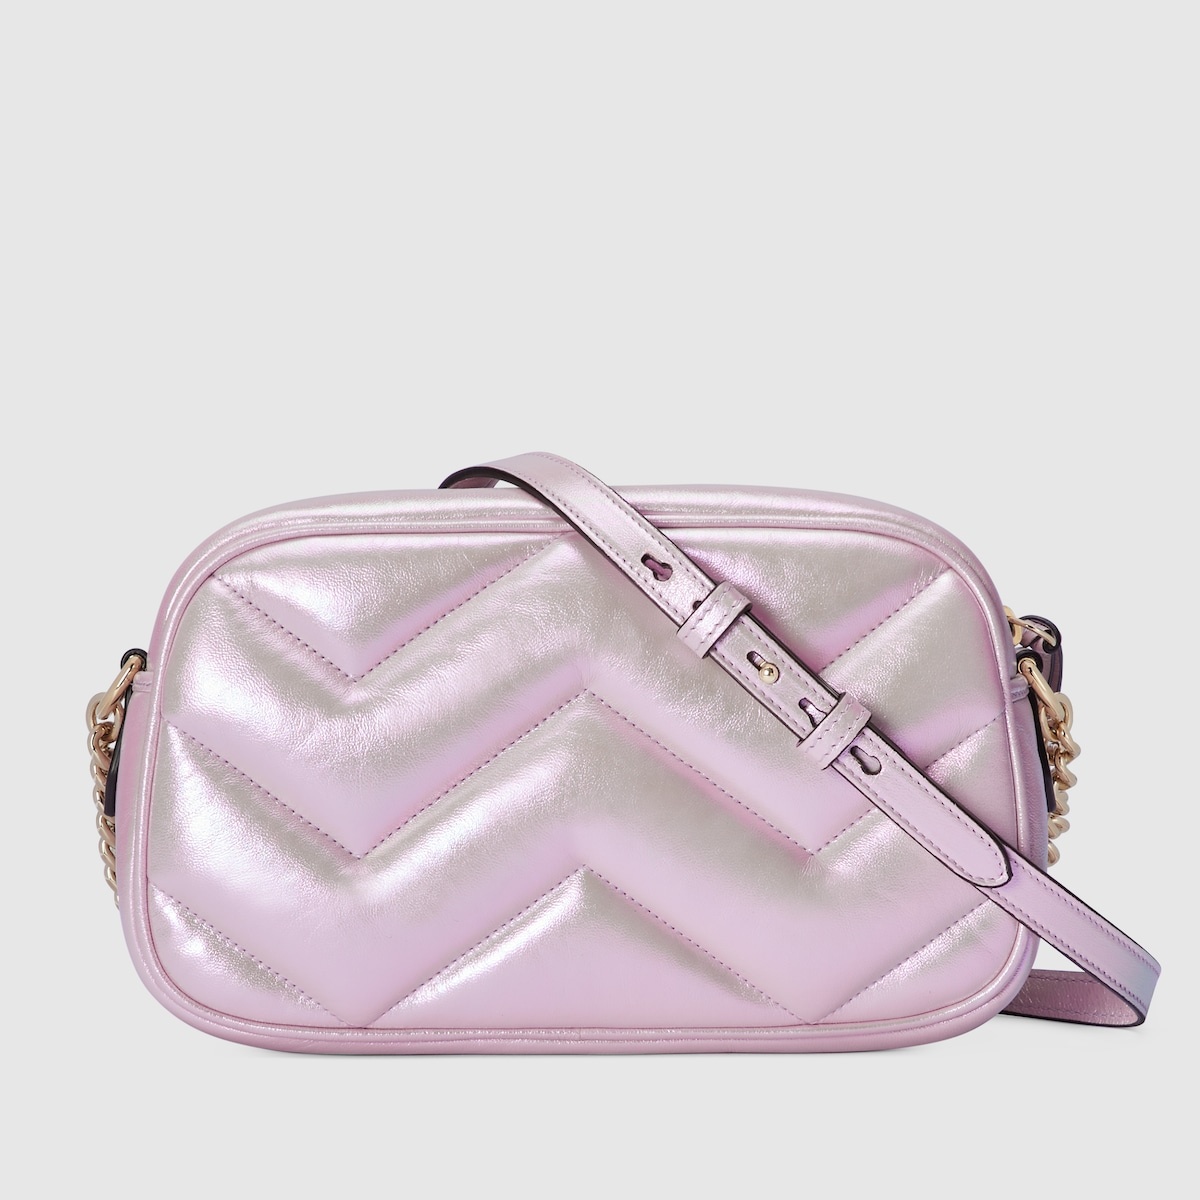 GG Marmont small shoulder bag - 6